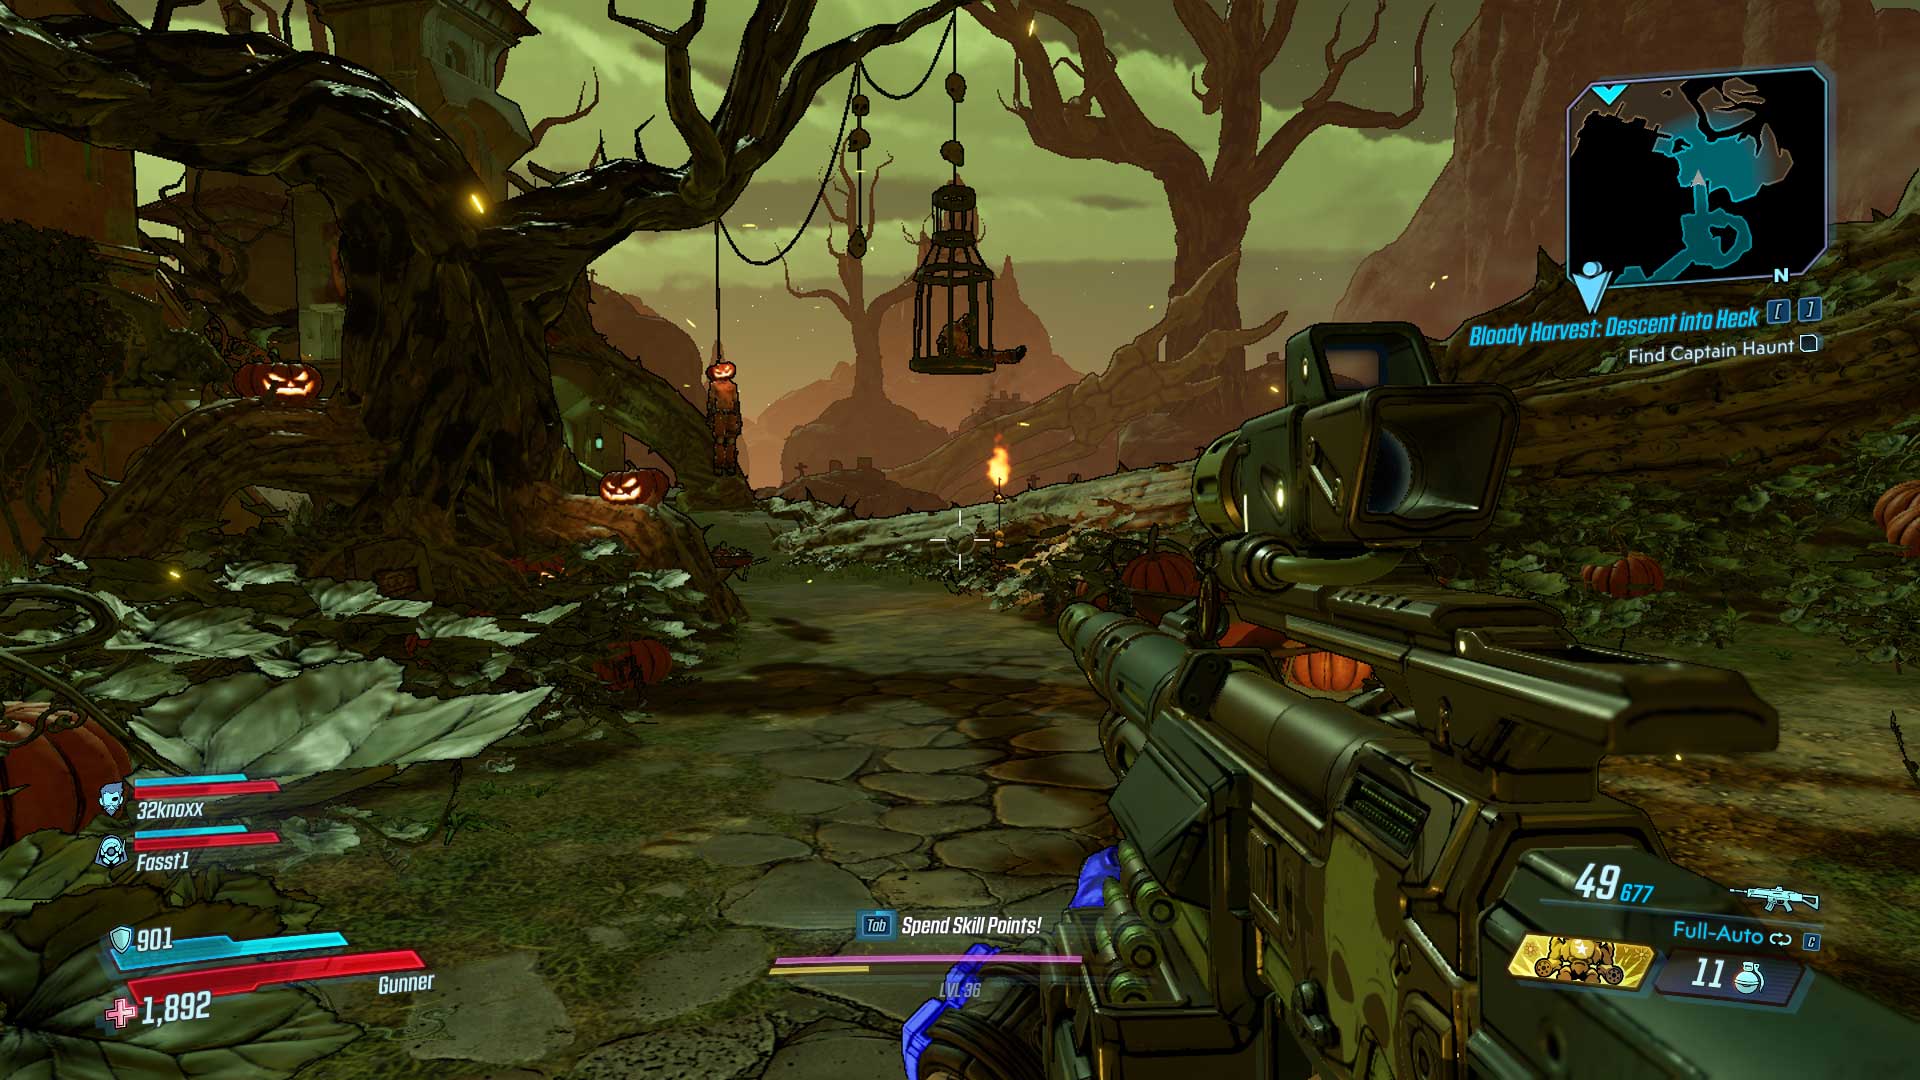 Jack o'lanterns and gibbet cages visible in Borderlands 3 as we explore Heck.